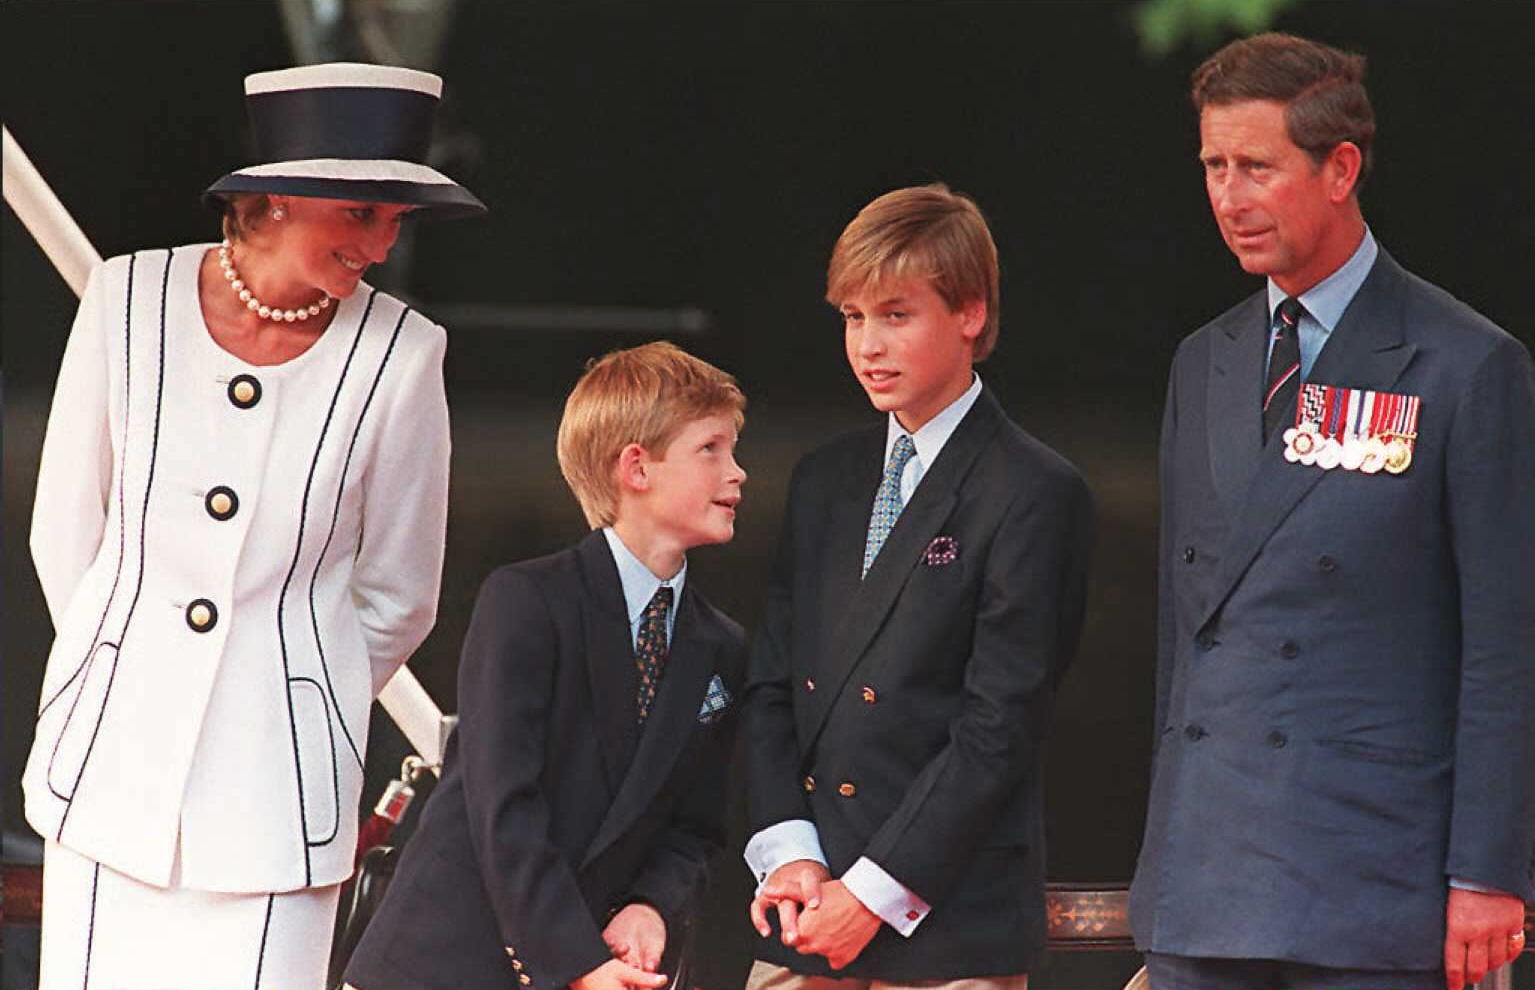 Princess Diana(L), her sons Harry(2nd L) and William(2nd R), and Prince Charles(R) watch the parade march past as part of the commemorations of VJ Day 19 August in London. The commemoration was held outside Buckingham Palace and was attended by 15,000 veterans and tens-of-thousands of spectators.  AFP PHOTO (Photo credit should read JOHNNY EGGITT/AFP/Getty Images)